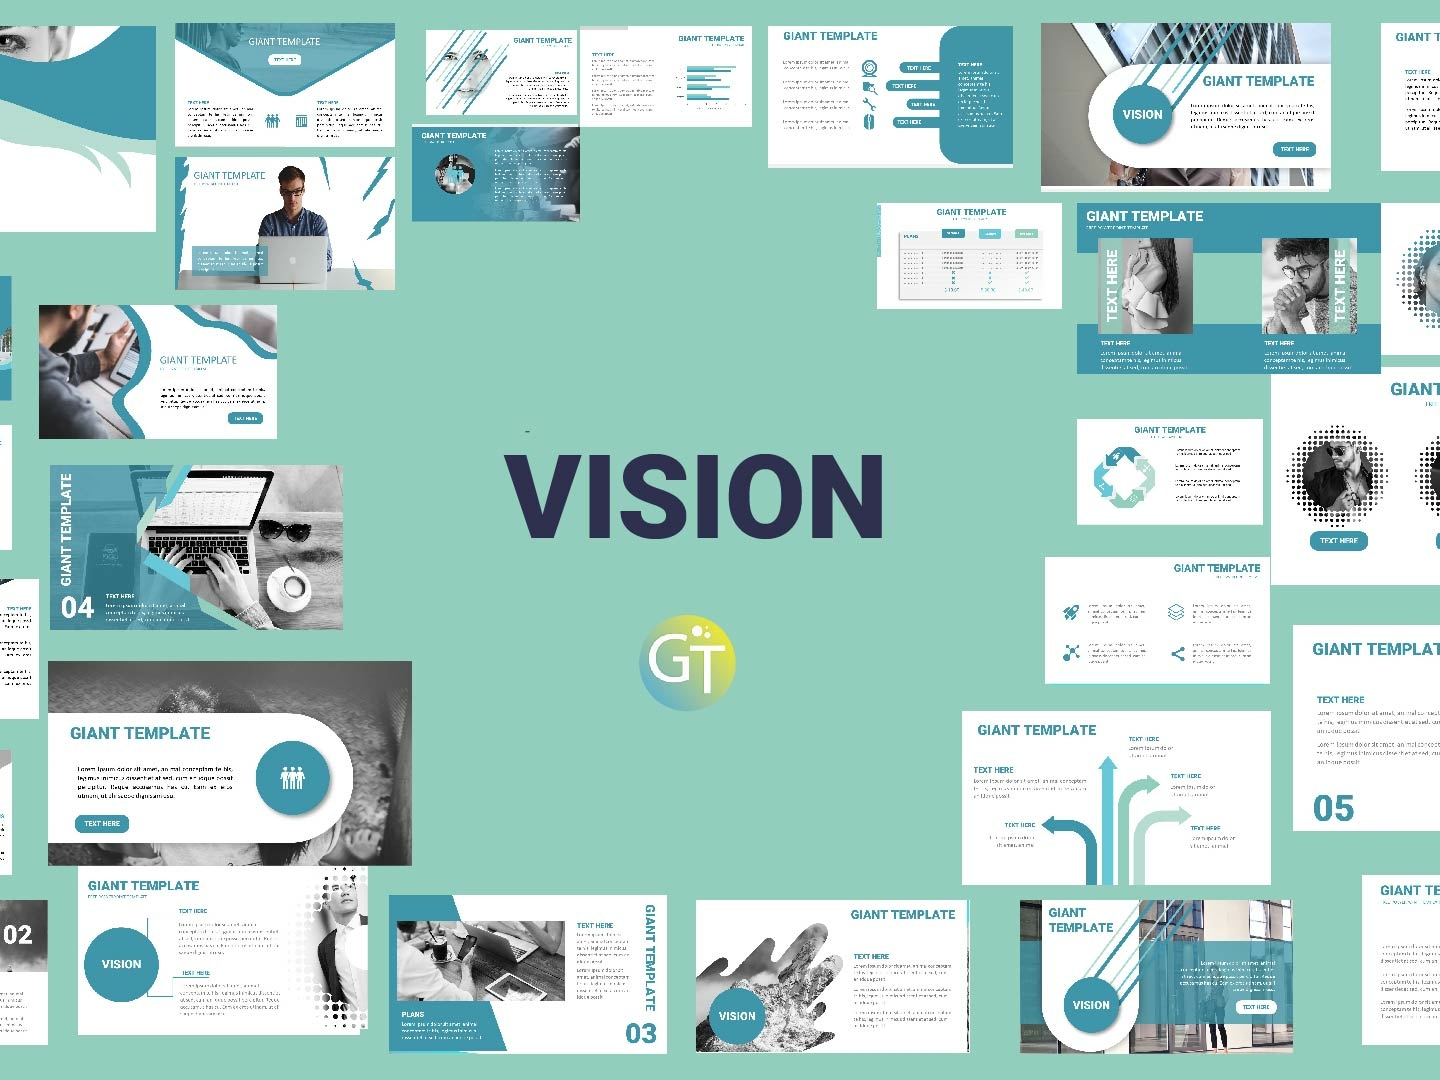 Vision Free Powerpoint Template by Giant Template on Dribbble